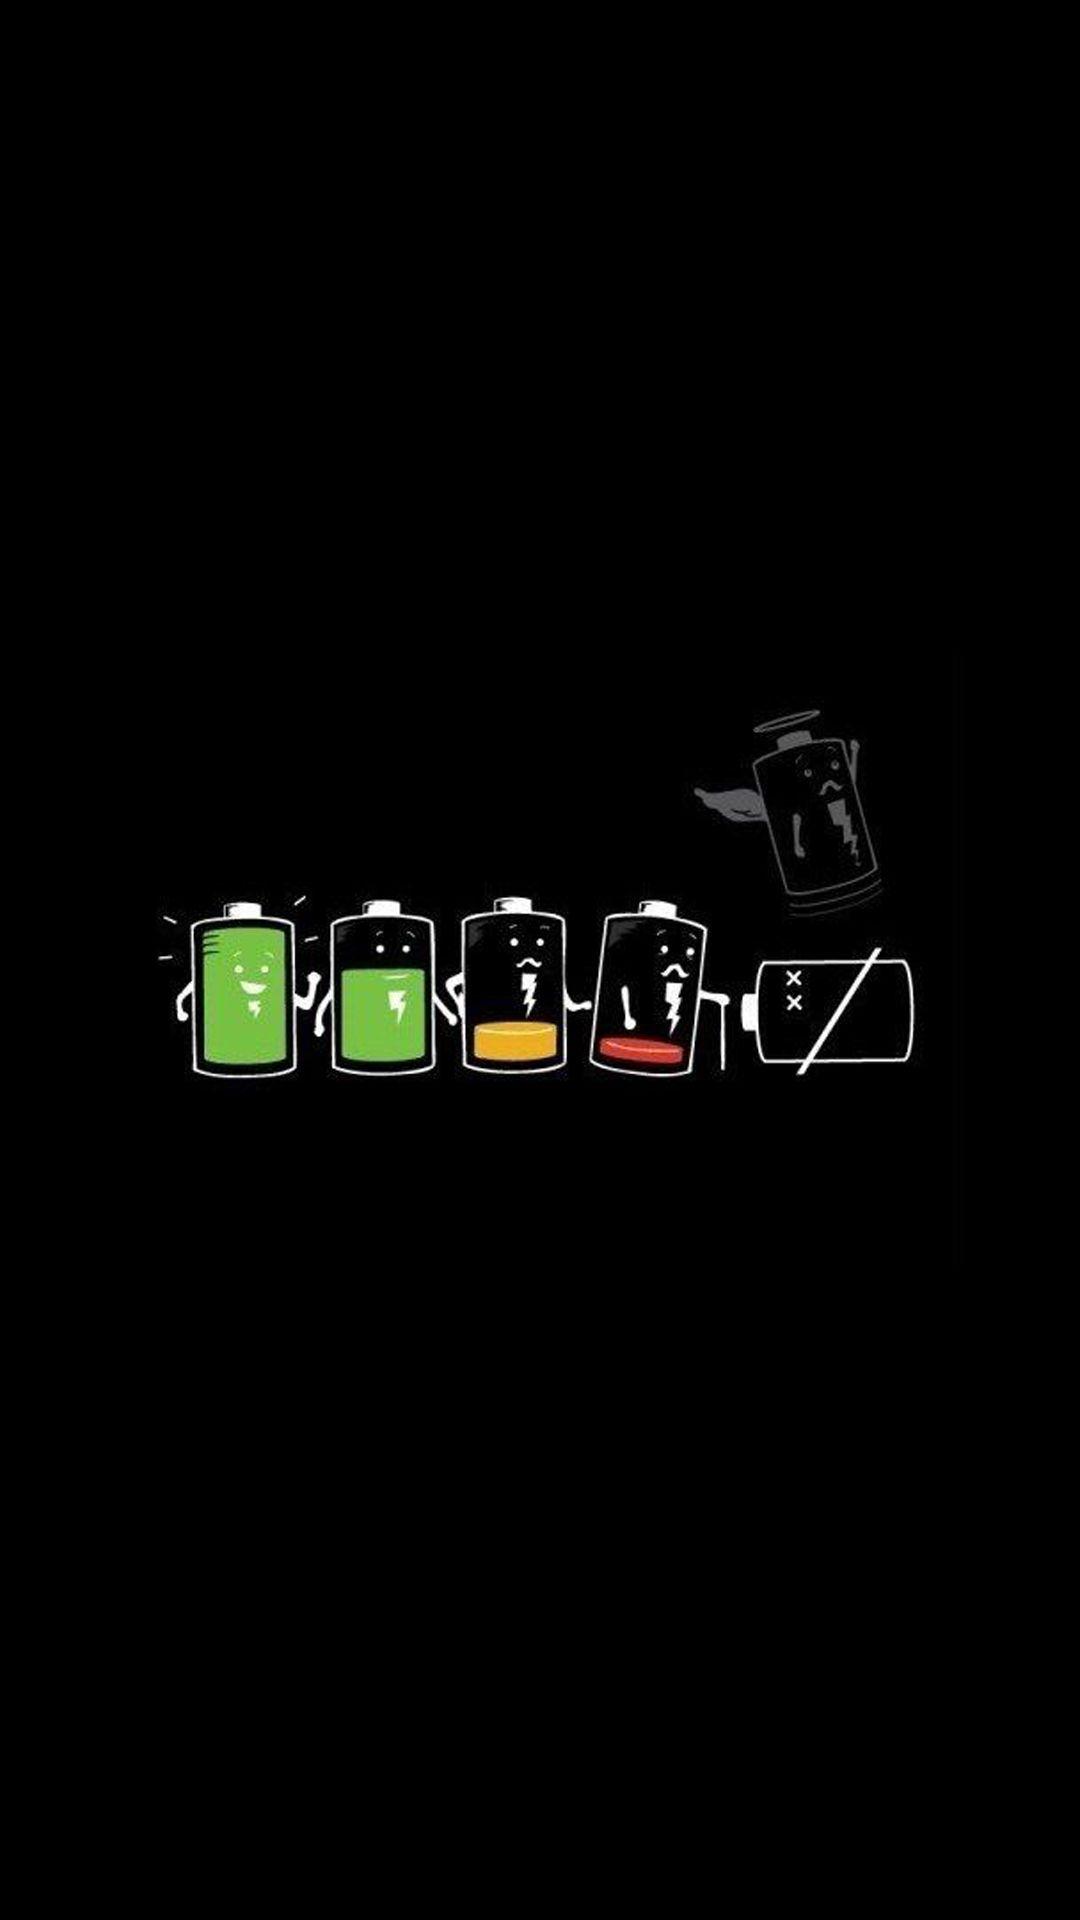 Battery Life Cycle Funny #iPhone #plus #wallpaper. Funny phone wallpaper, Funny iphone wallpaper, Cellphone wallpaper